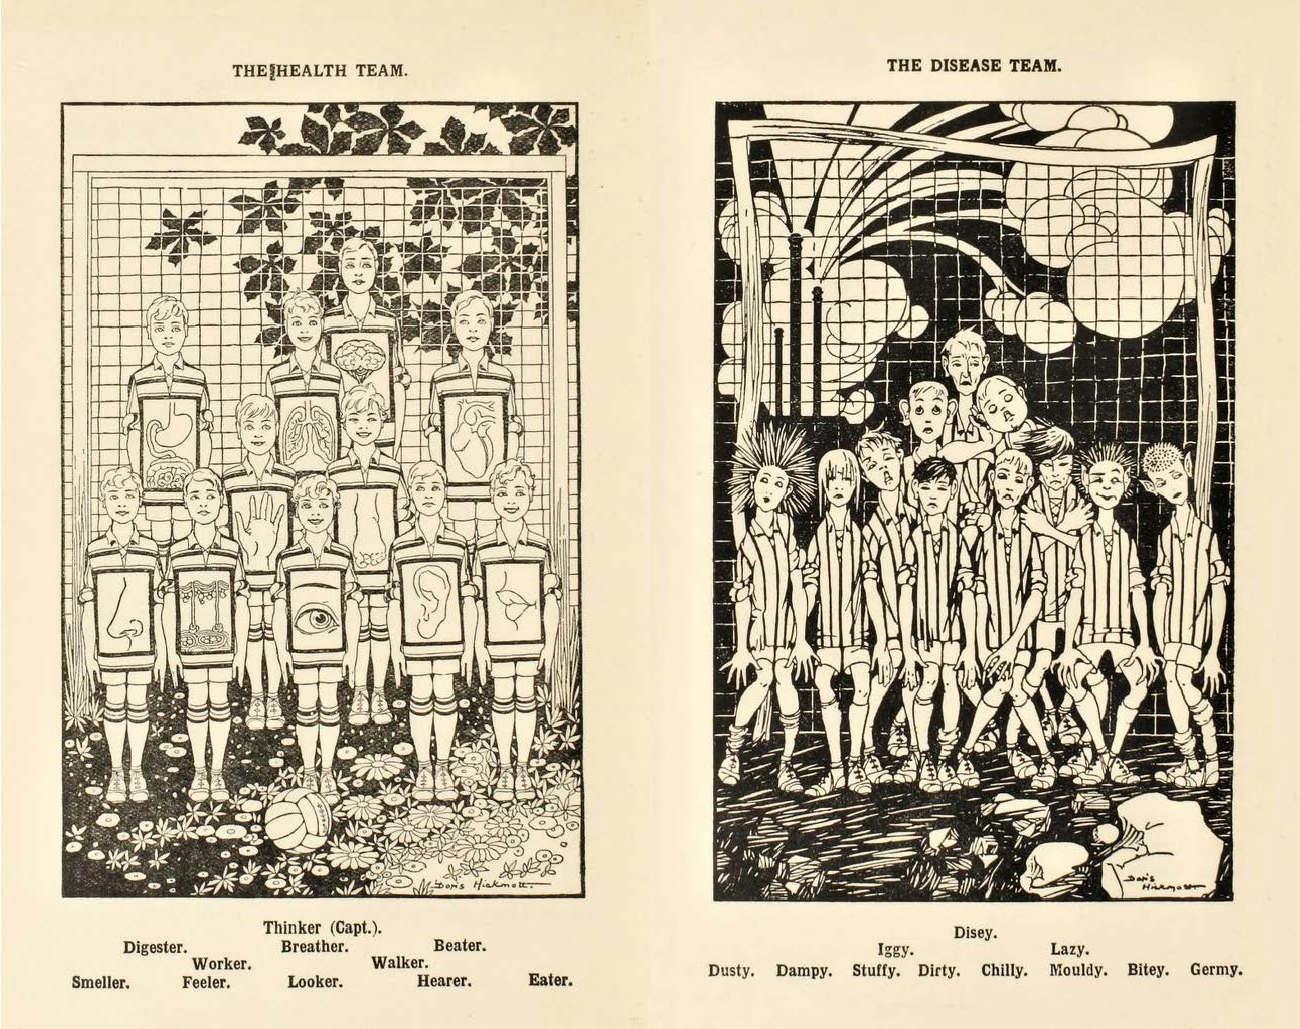 Printed black and white drawings of two football teams comprised of children. On the left are "The Health Team" featuring Thinker (Capt.), Digester, Breather, Beater, Worker, Walker, Smeller, Feeler, Looker, Hearer and Eater. On the right are "The Disease Team" featuring Disey, Iggy, Lazy, Dusty, Dampy, Stuffy, Dirty, Chilly, Mouldy, Bitey and Germy.